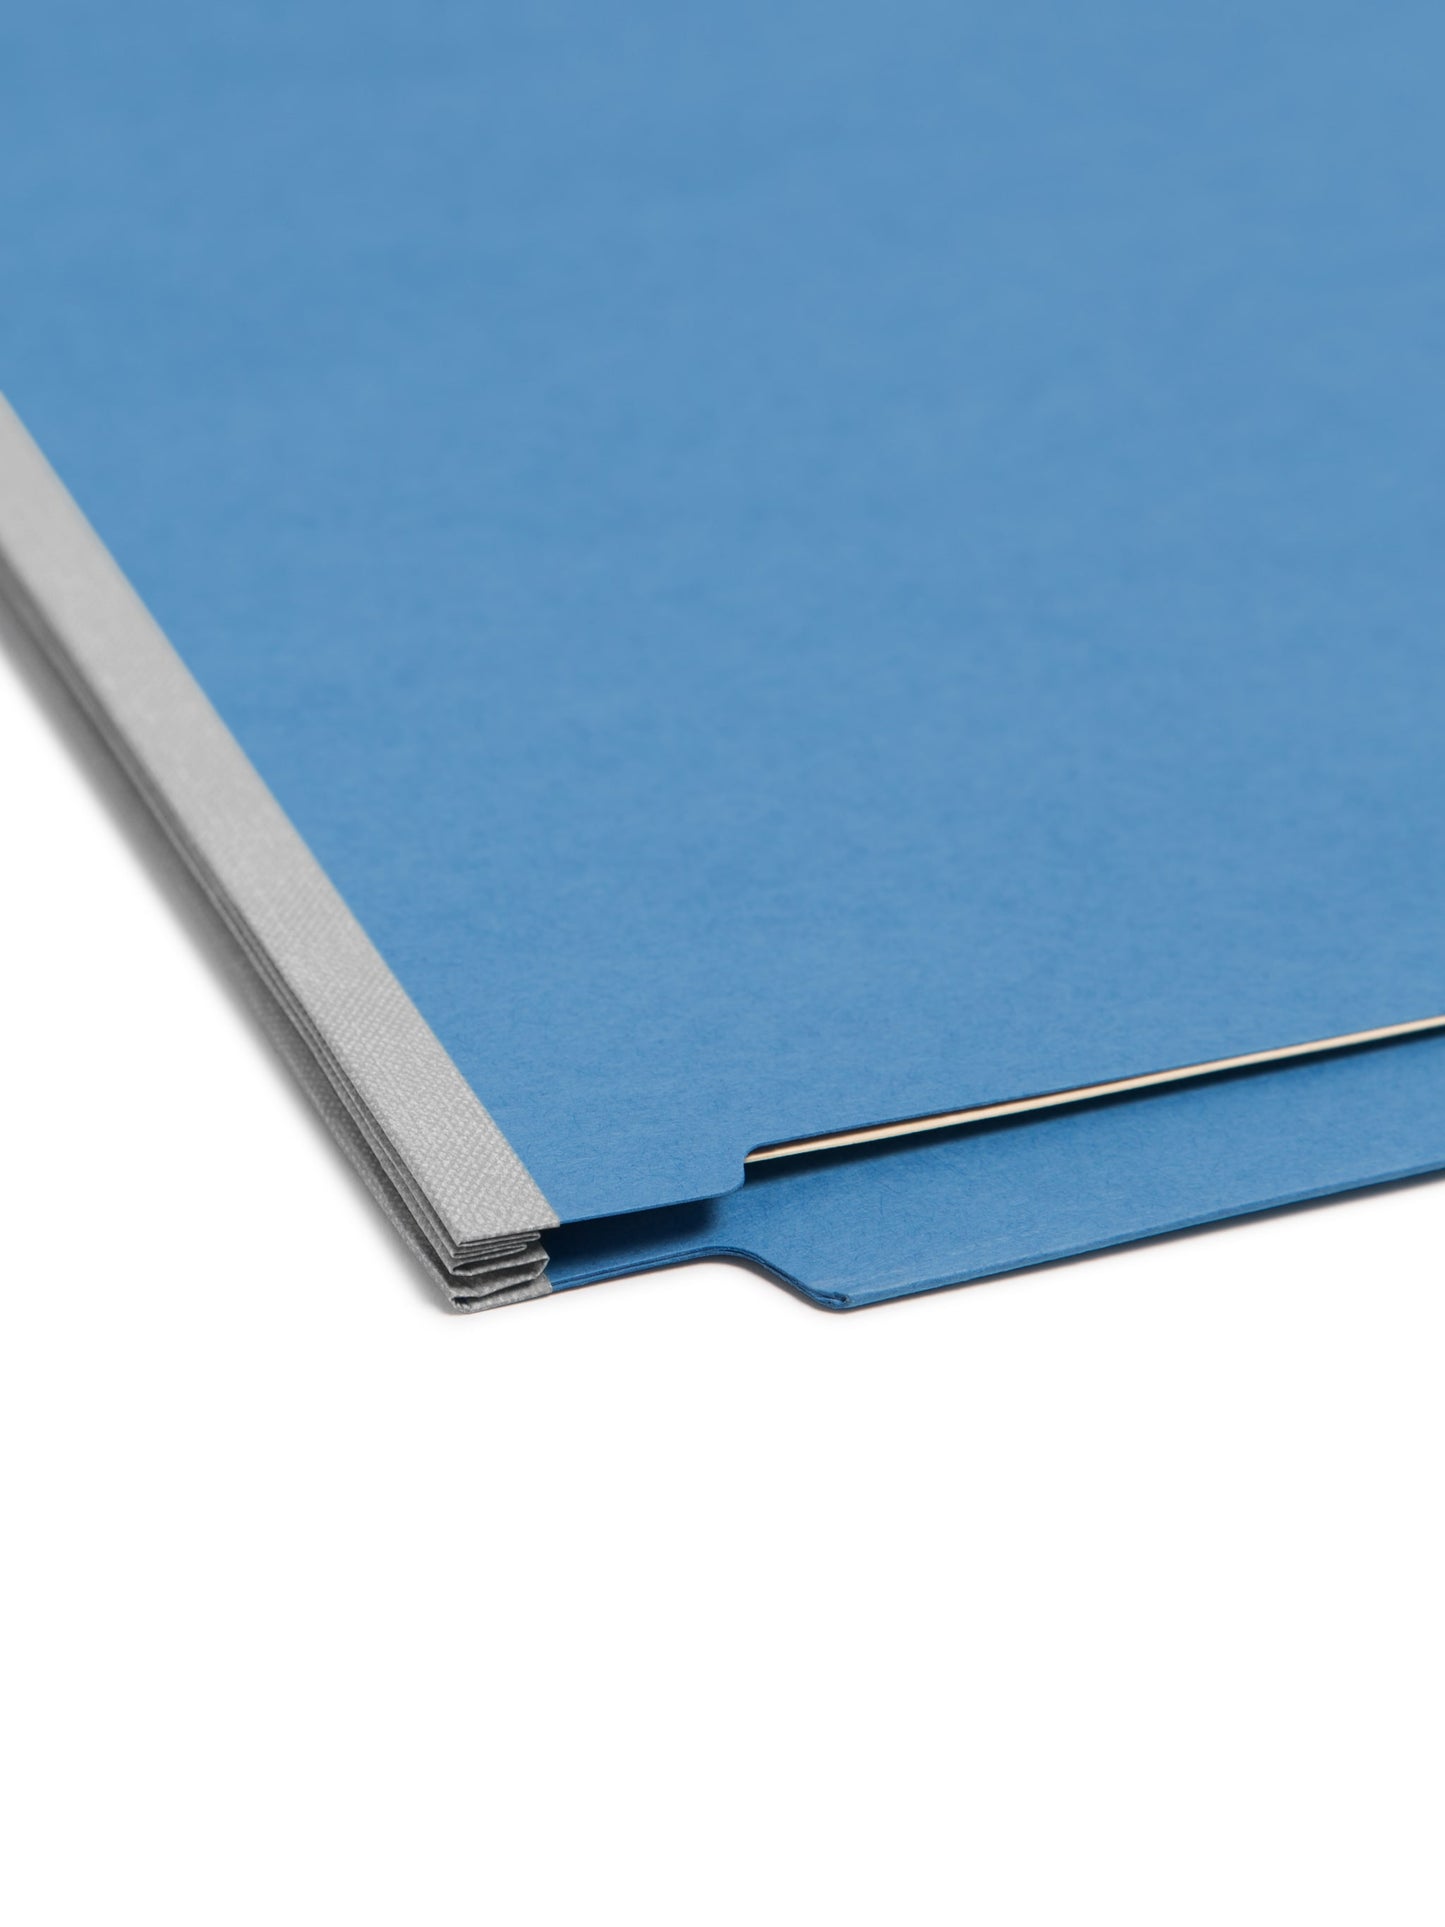 End Tab Classification File Folders, Straight-Cut Tab, 2 inch Expansion, 2 Dividers, Blue Color, Letter Size, Set of 0, 30086486268364